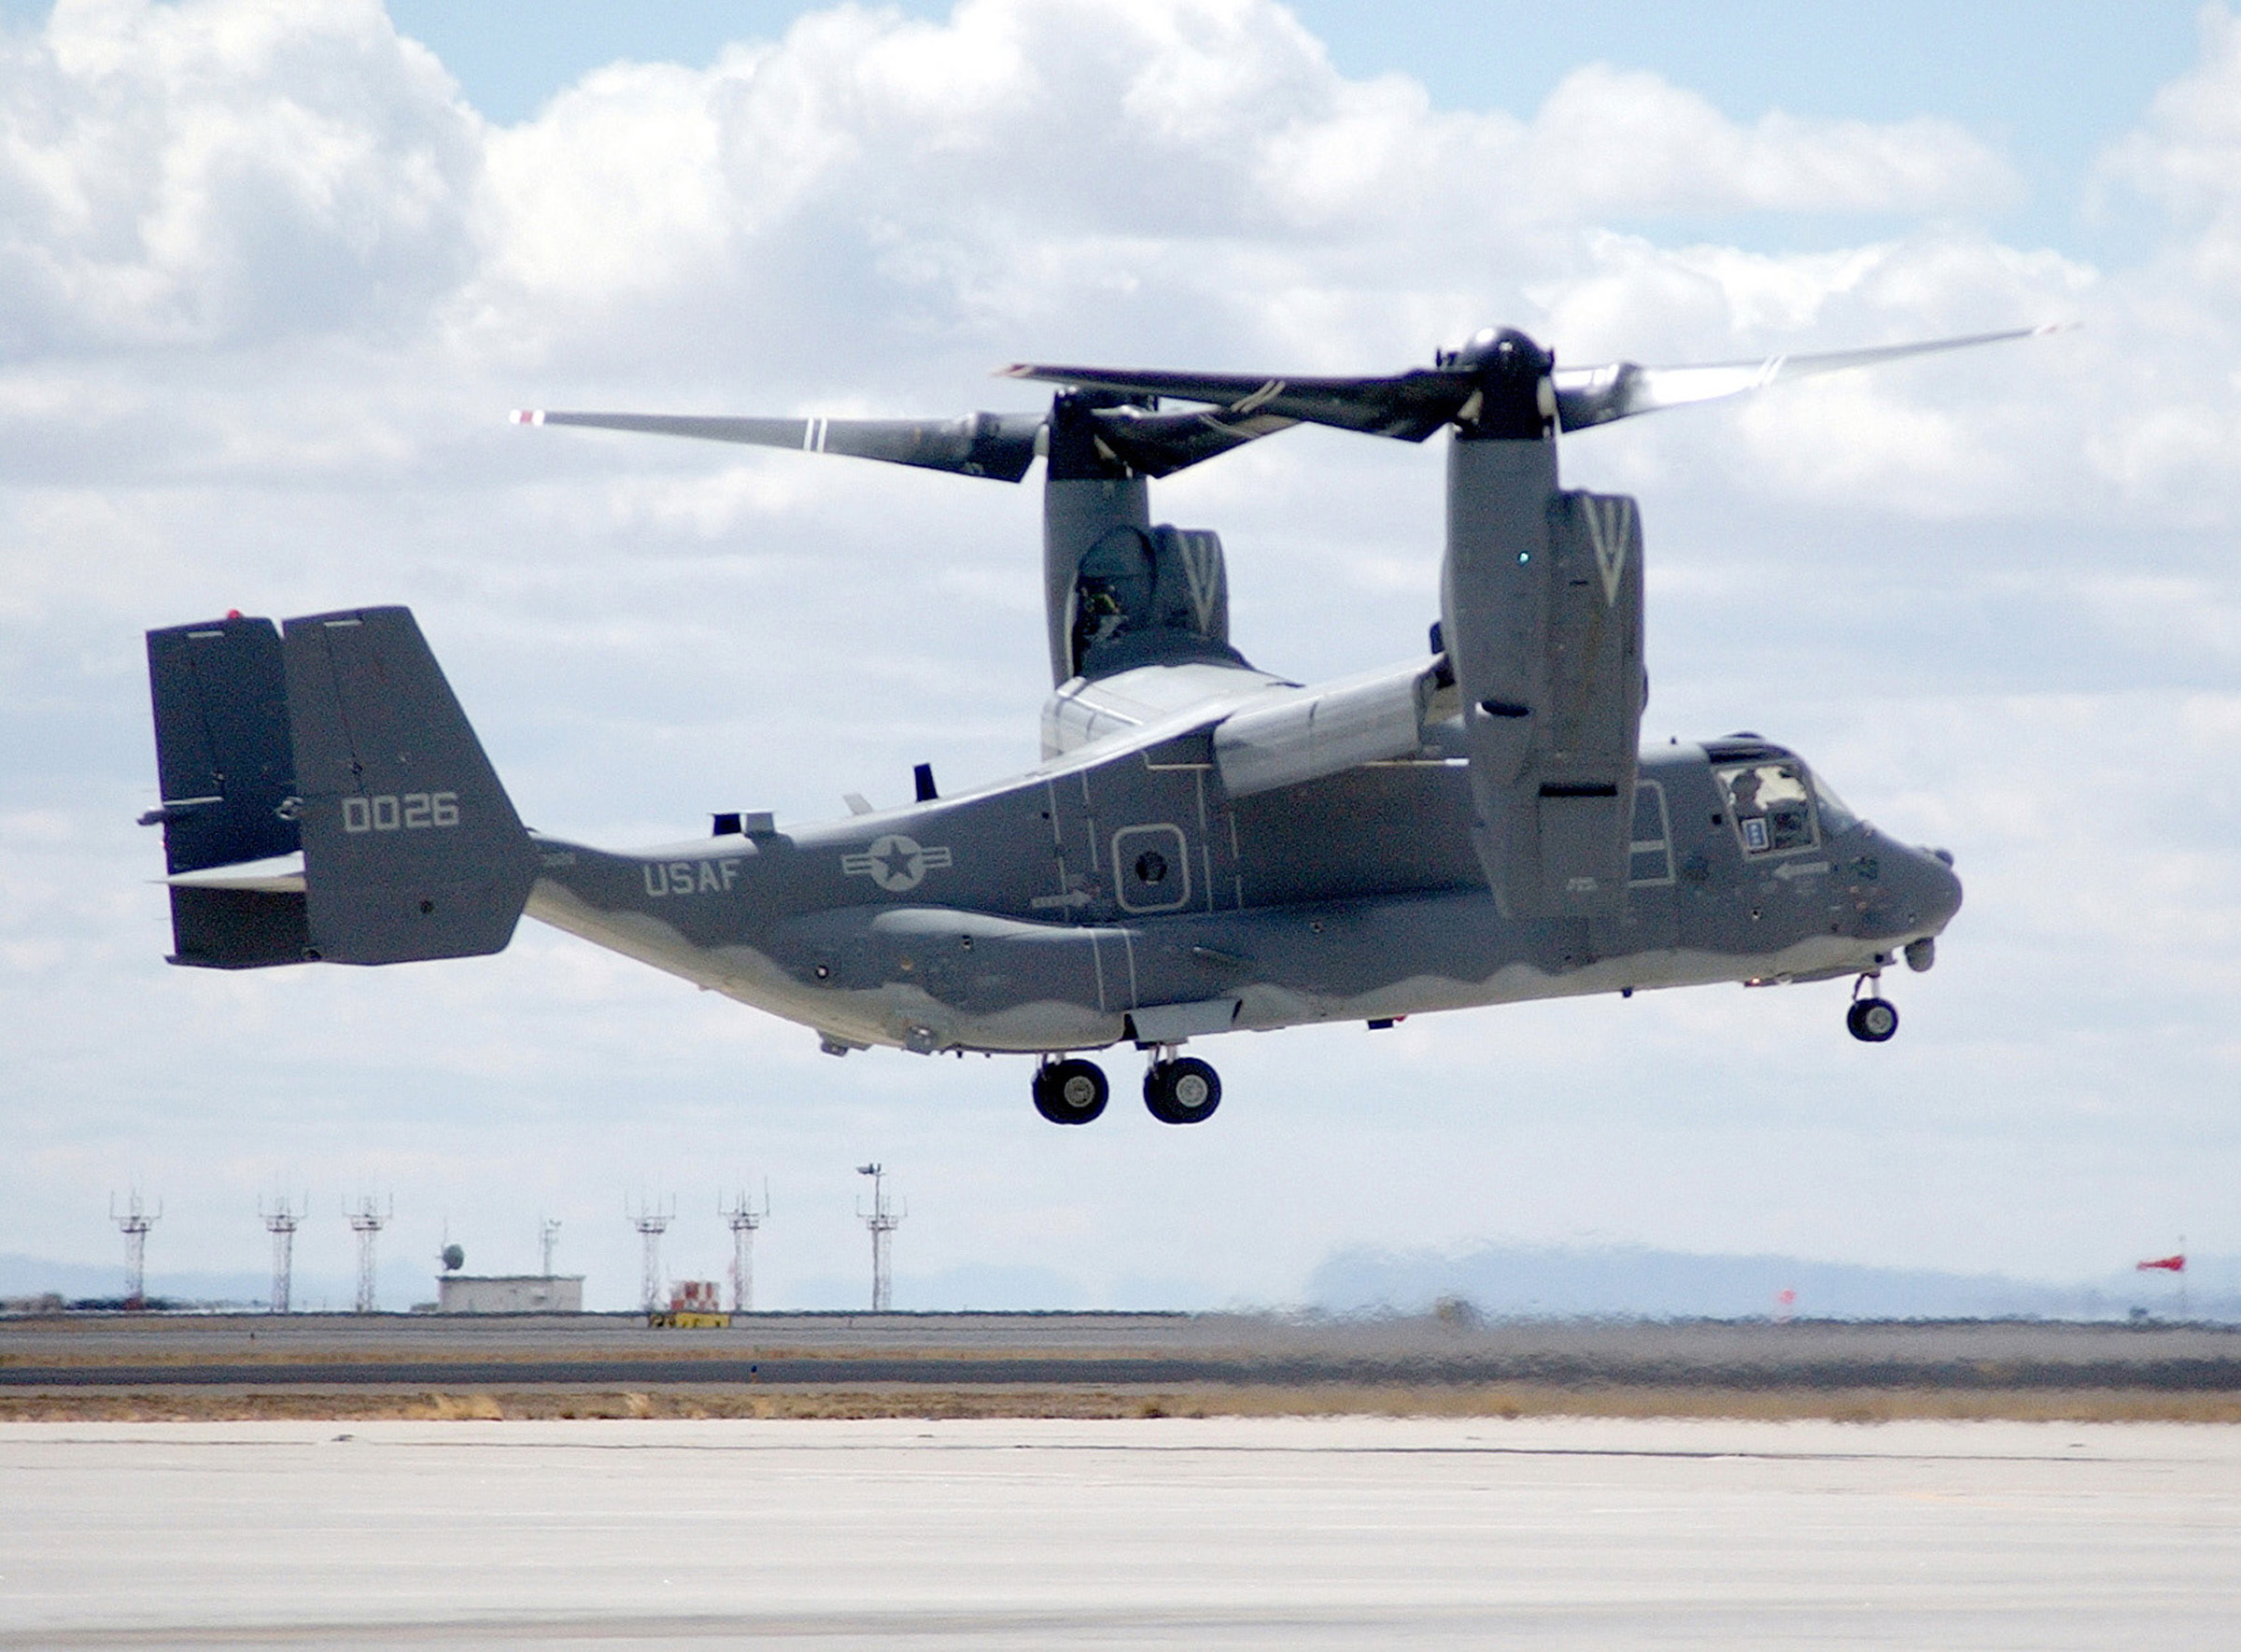 Aircraft Wallpapers Jet Aircraft Wallpapers Ww2 Aircraft - Us Air Force Osprey Helicopter - HD Wallpaper 